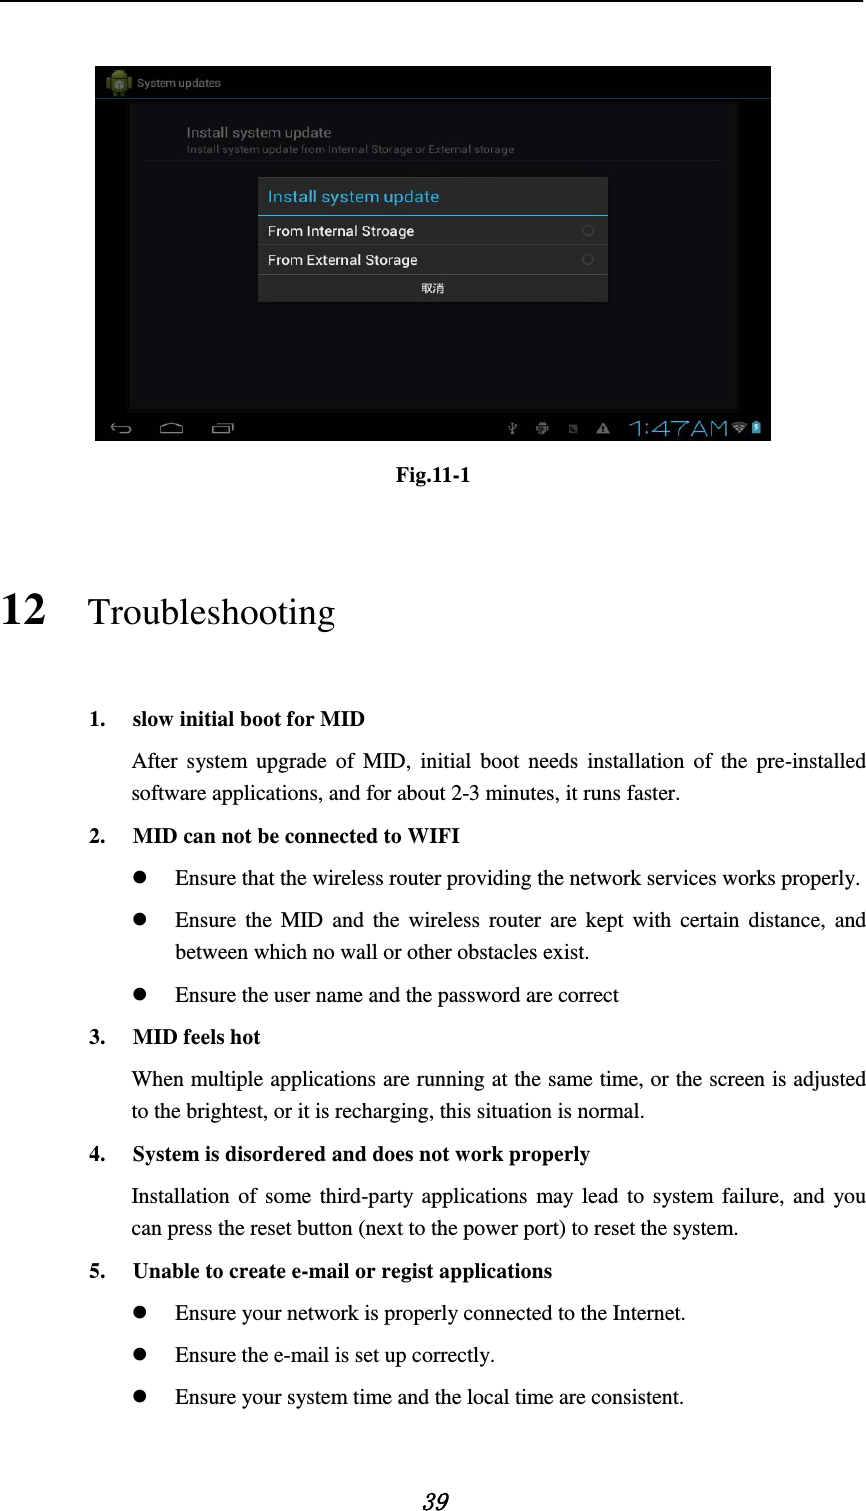    39   Fig.11-1 12 Troubleshooting 1. slow initial boot for MID After system upgrade of MID, initial boot needs installation of the pre-installed software applications, and for about 2-3 minutes, it runs faster. 2. MID can not be connected to WIFI  Ensure that the wireless router providing the network services works properly.  Ensure the MID and the wireless router are kept with certain distance, and between which no wall or other obstacles exist.  Ensure the user name and the password are correct 3. MID feels hot When multiple applications are running at the same time, or the screen is adjusted to the brightest, or it is recharging, this situation is normal. 4. System is disordered and does not work properly Installation of some third-party applications may lead to system failure, and you can press the reset button (next to the power port) to reset the system. 5. Unable to create e-mail or regist applications  Ensure your network is properly connected to the Internet.  Ensure the e-mail is set up correctly.  Ensure your system time and the local time are consistent.  